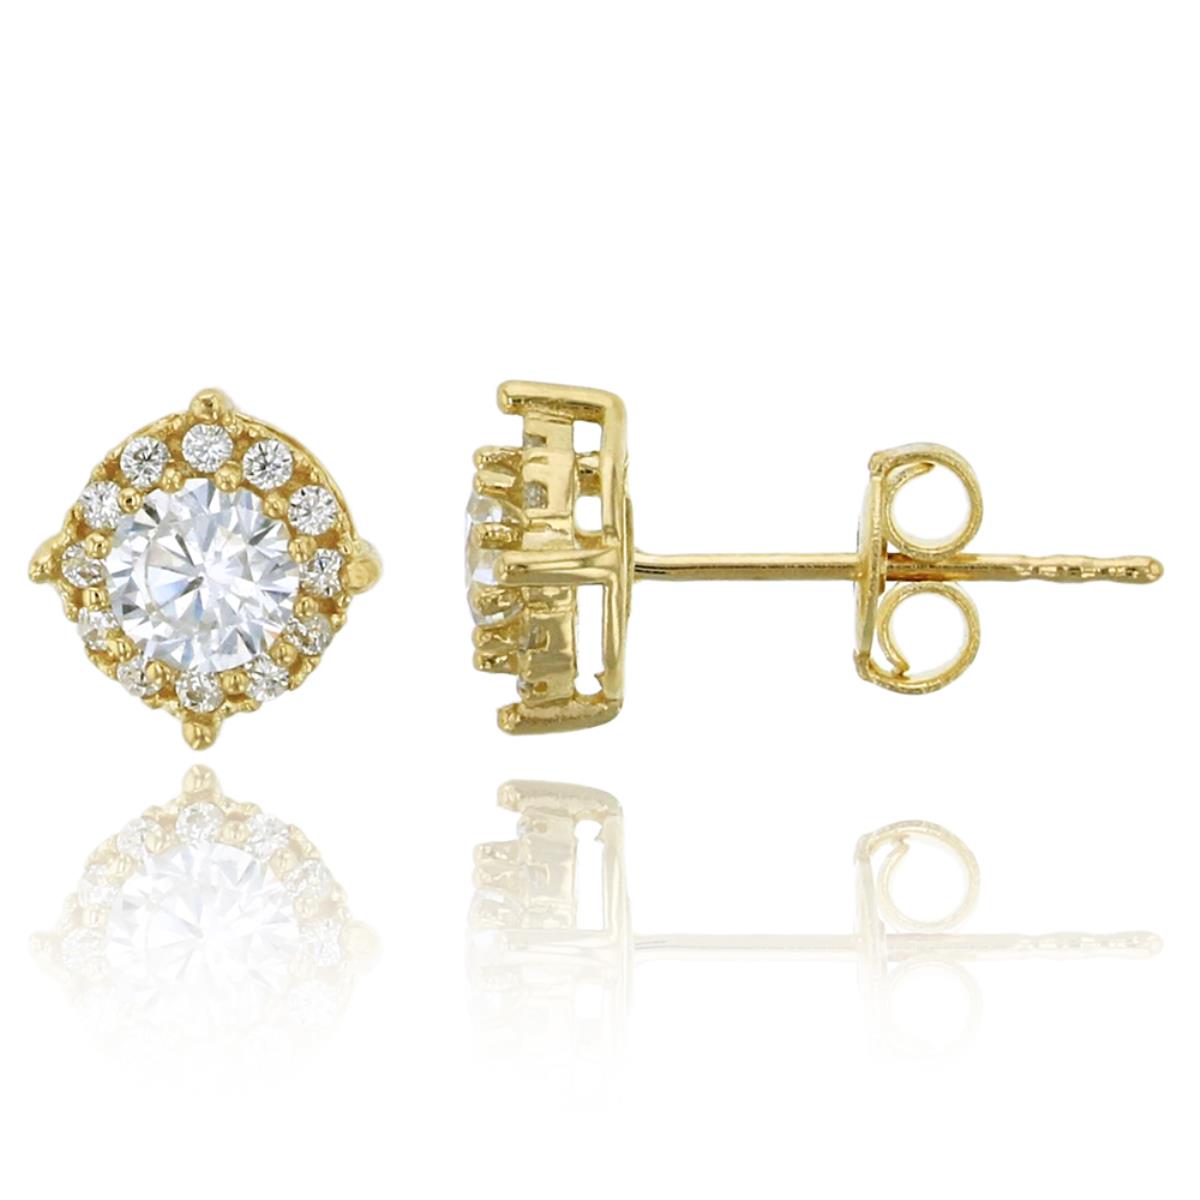 10K Yellow Gold 6mm  Micropave Round Cut Halo Stud Earrings with Push Backs